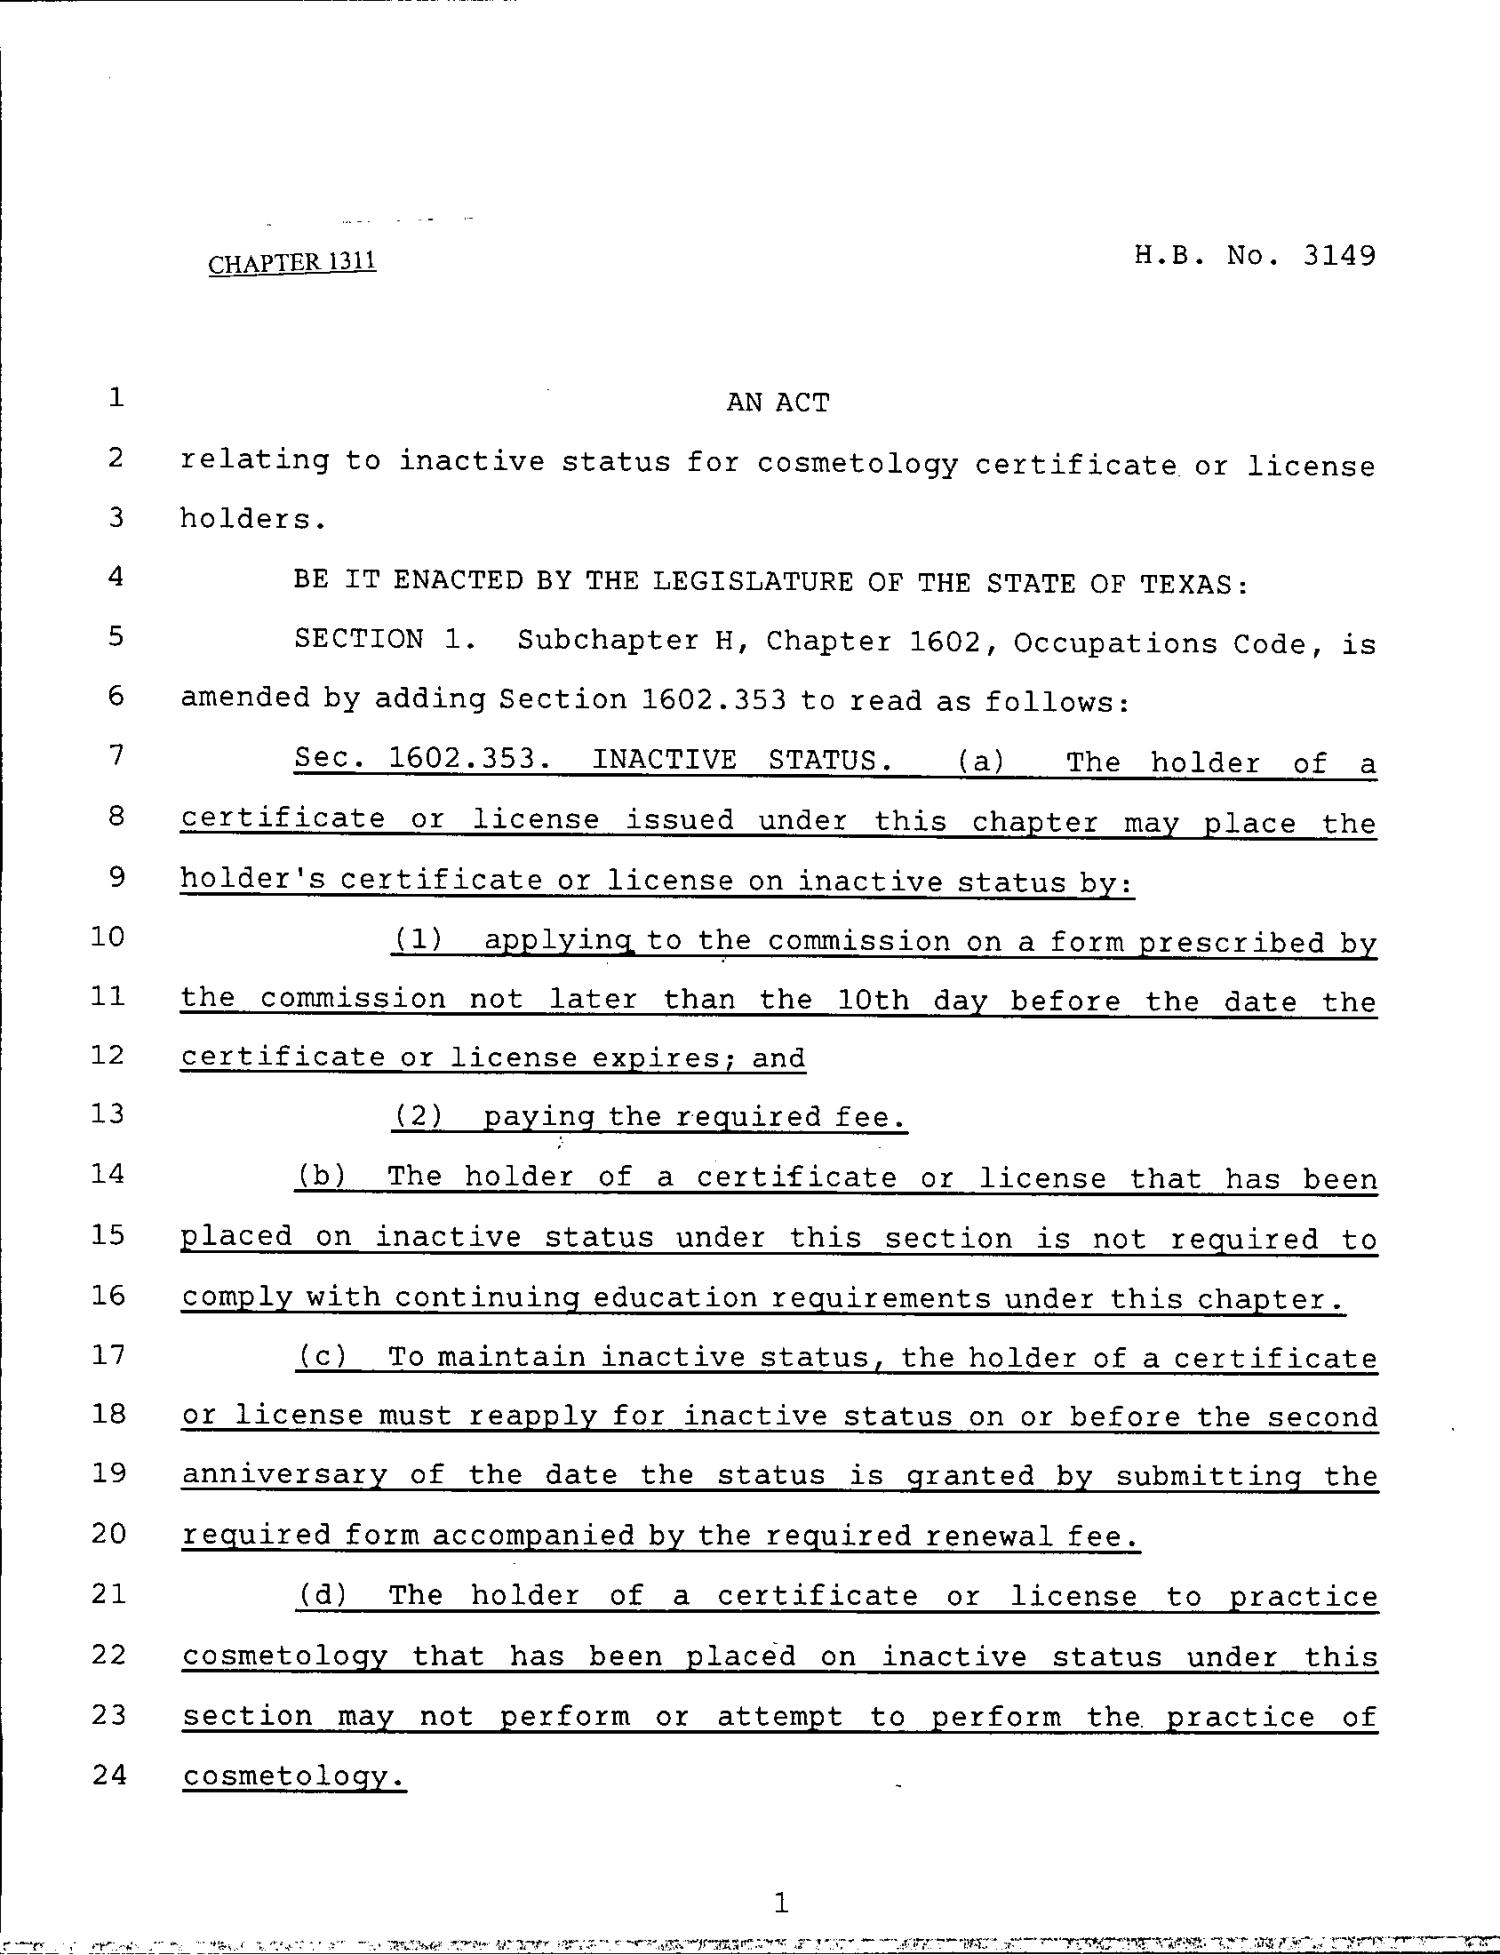 79th Texas Legislature, Regular Session, House Bill 3149, Chapter 1311
                                                
                                                    [Sequence #]: 1 of 4
                                                